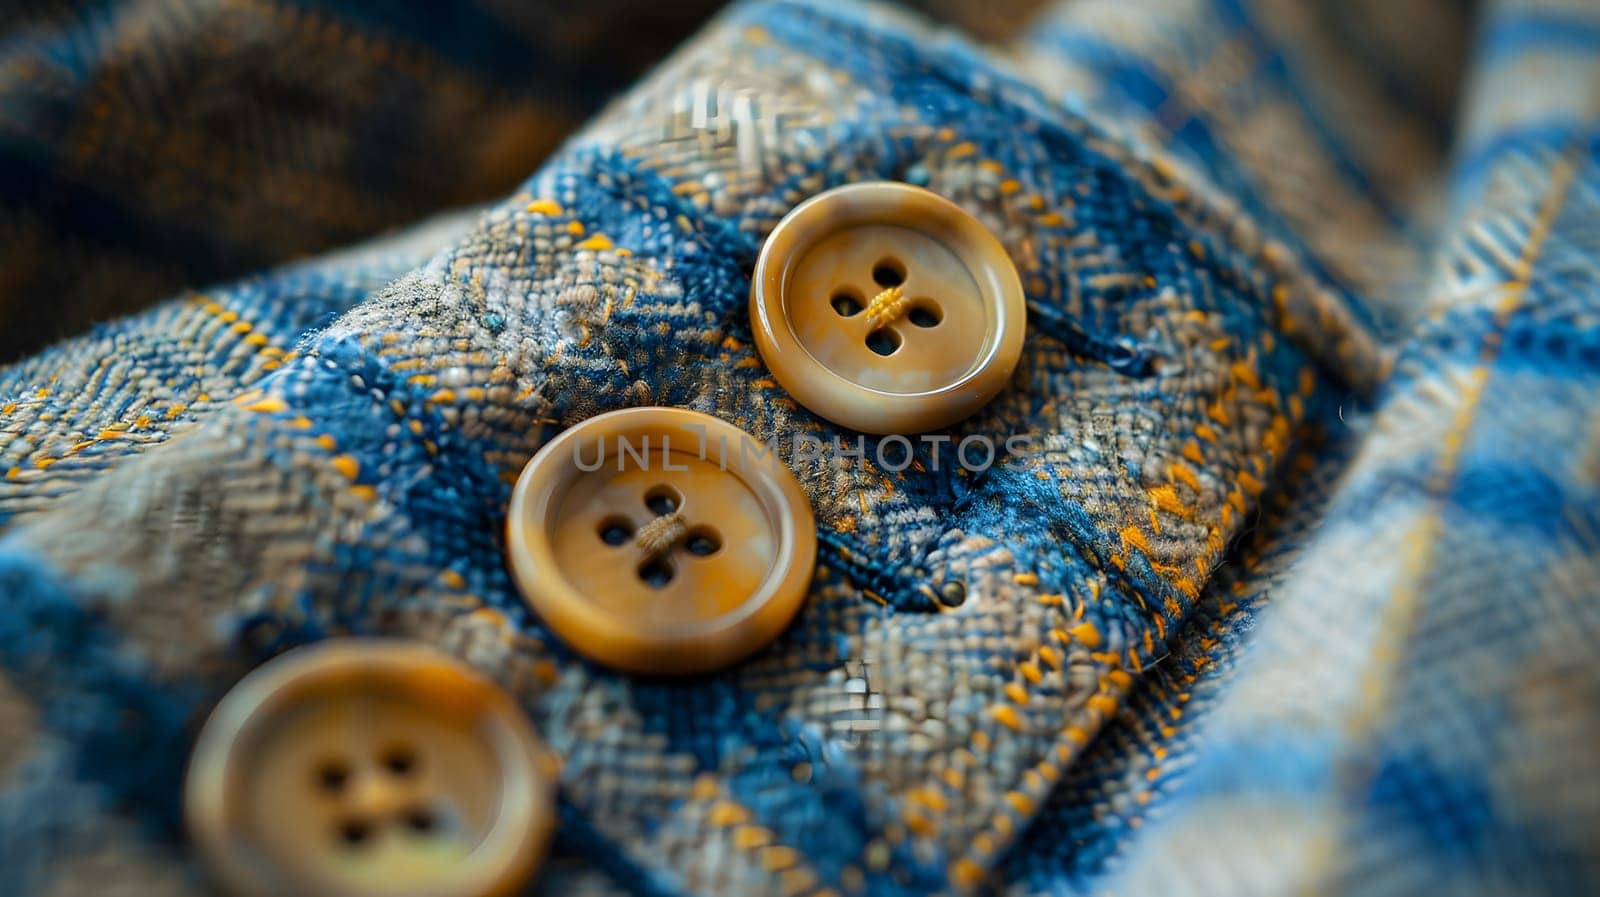 A closeup shot of three electric blue buttons on a stylish blue and yellow plaid shirt, showcasing a beautiful pattern and a fashion accessory made of metal and wood